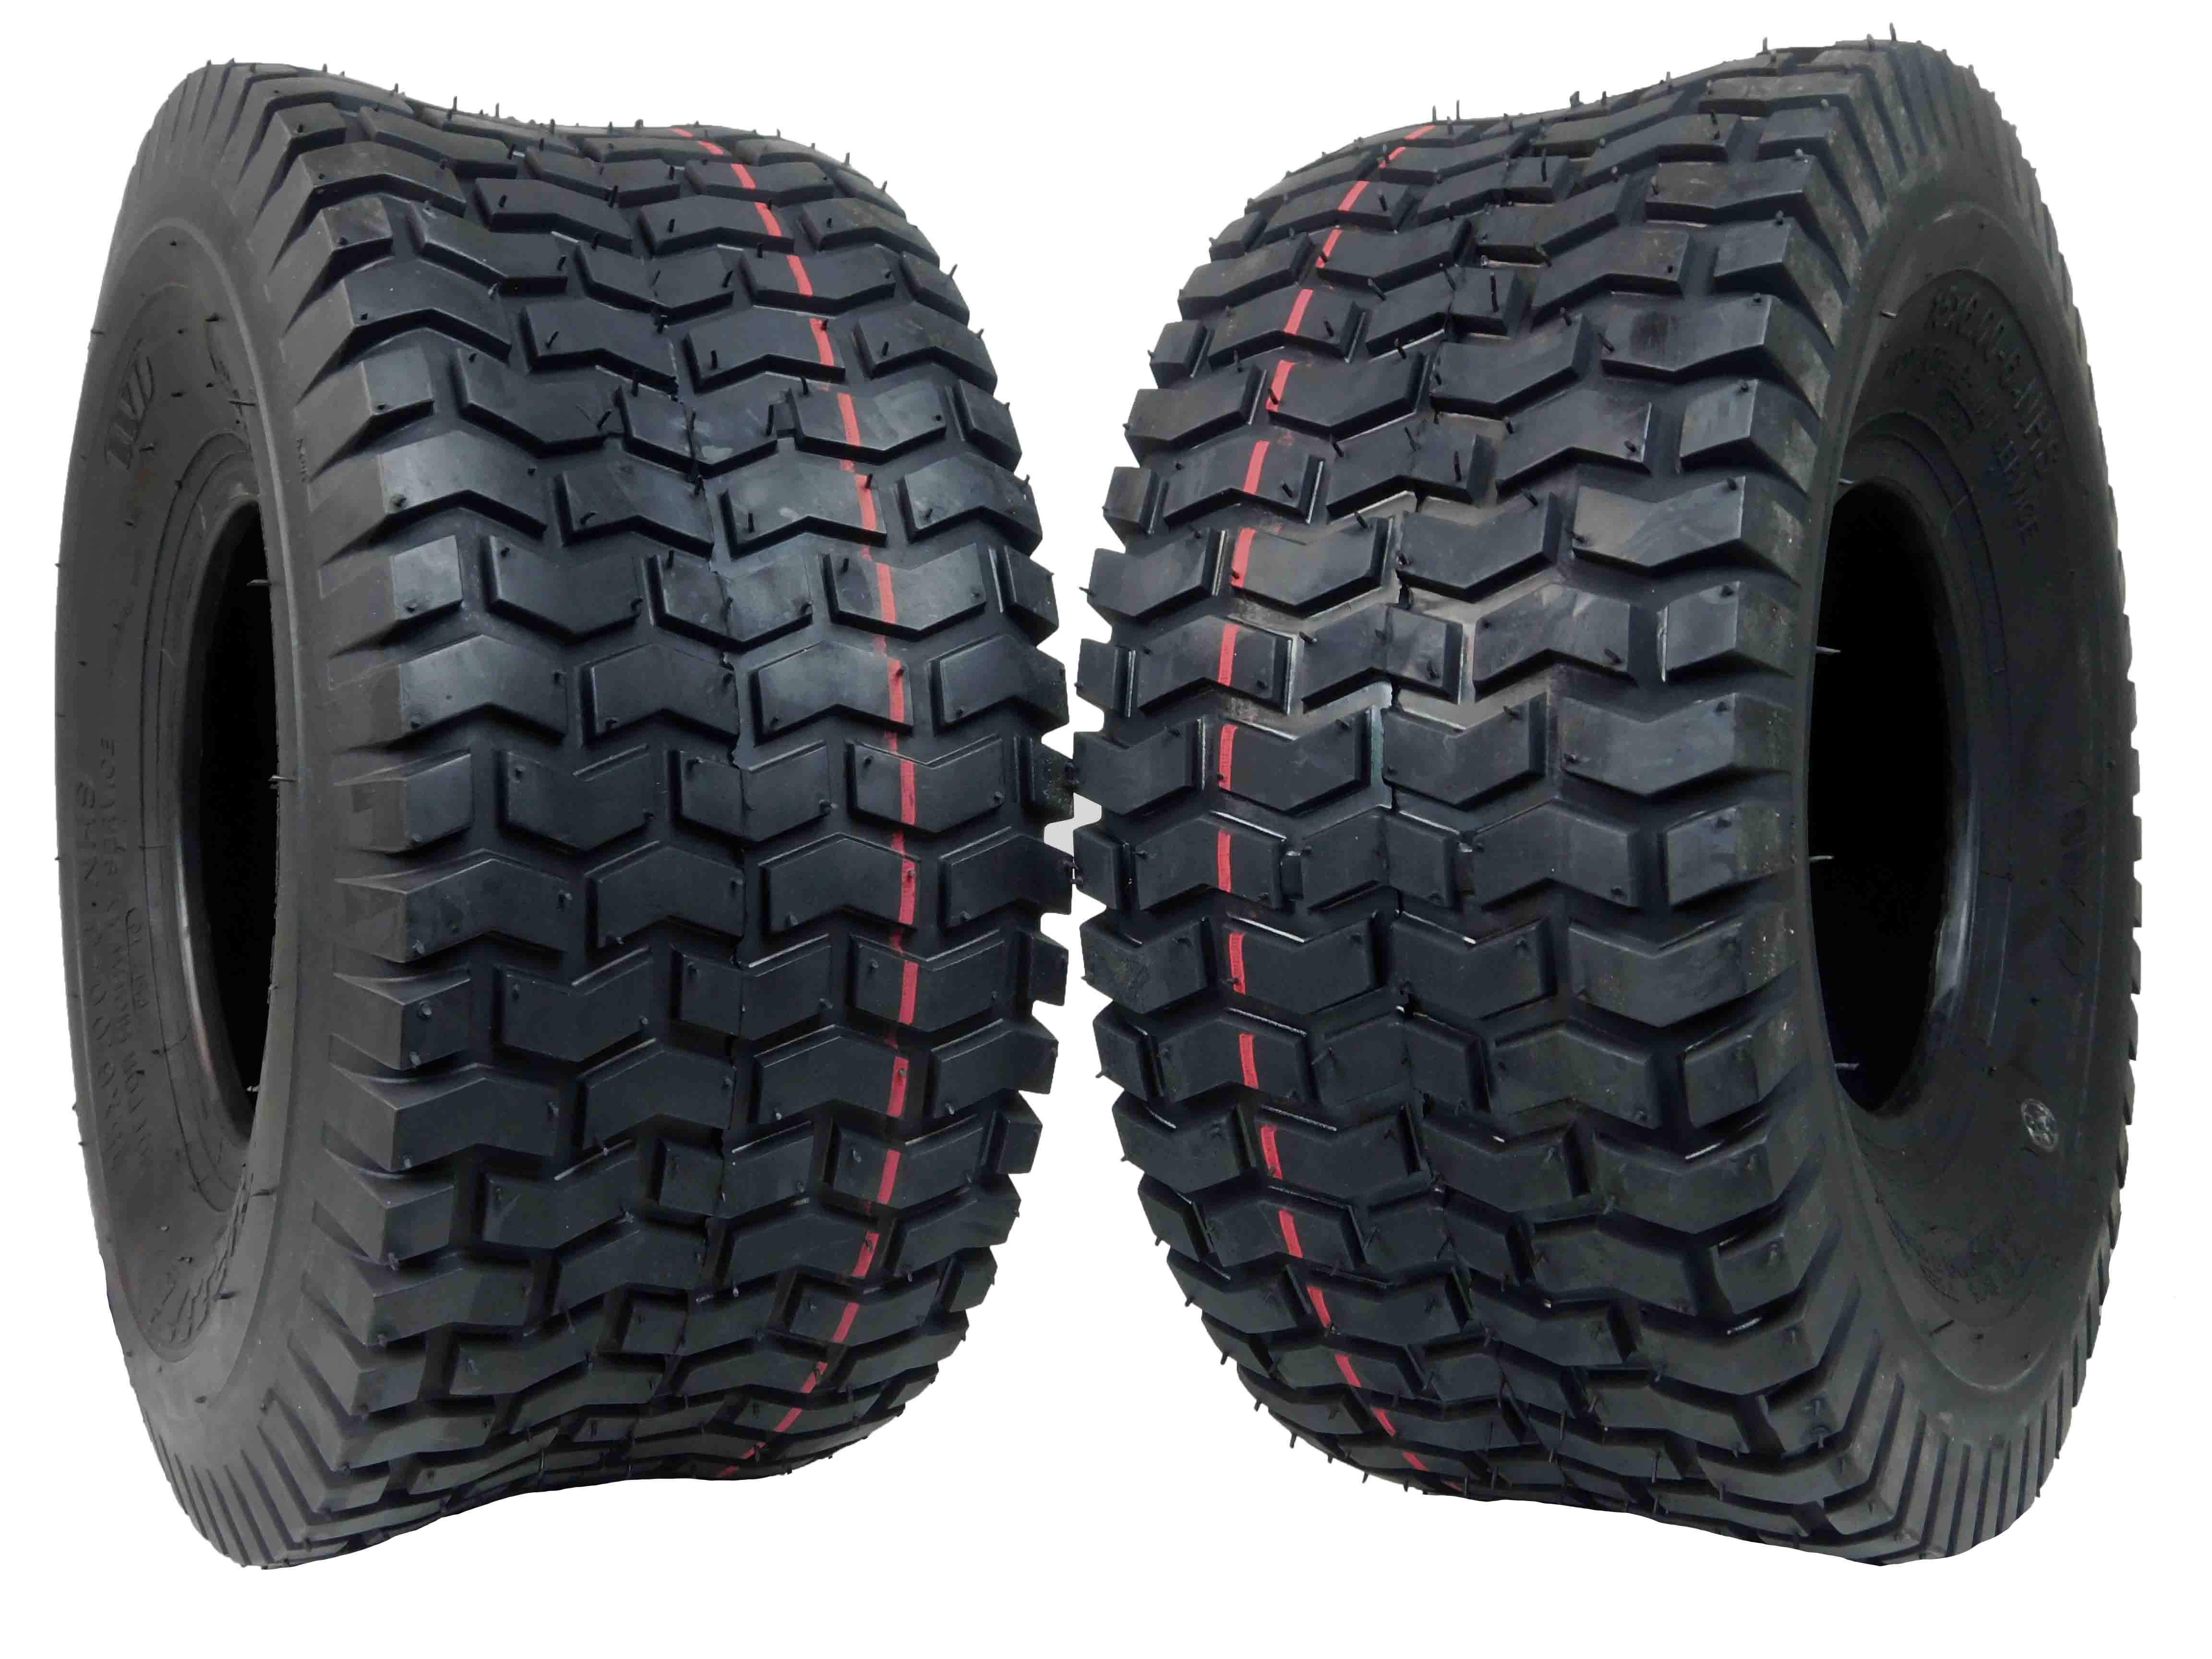 Details about   2 Pack MASSFX 15x6-6 Lawn mower Tires 15x6-6 15x6x6 4PLY 6mm Tread Depth 